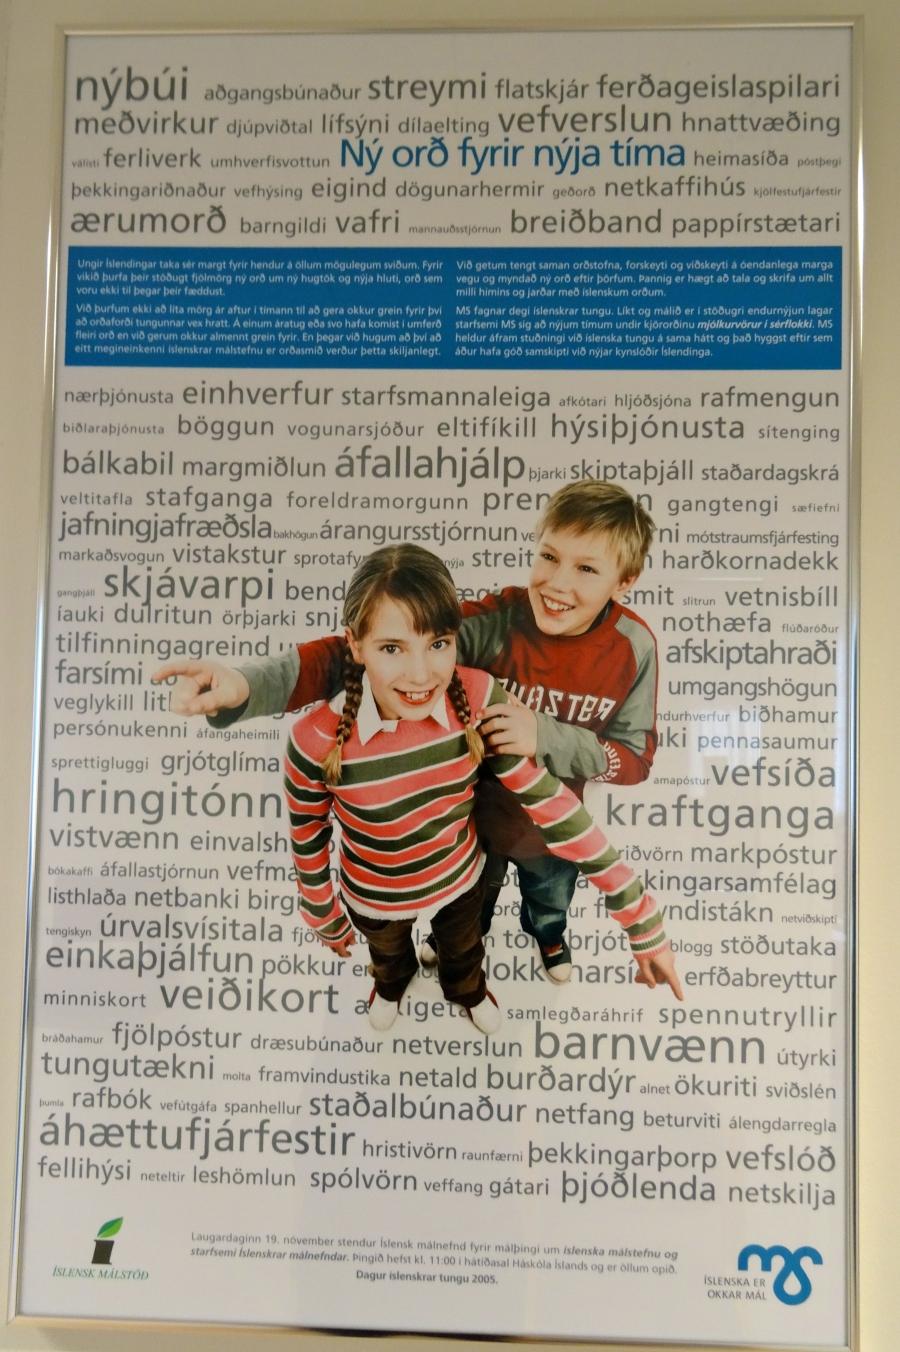 A poster promoting the Icelandic language.